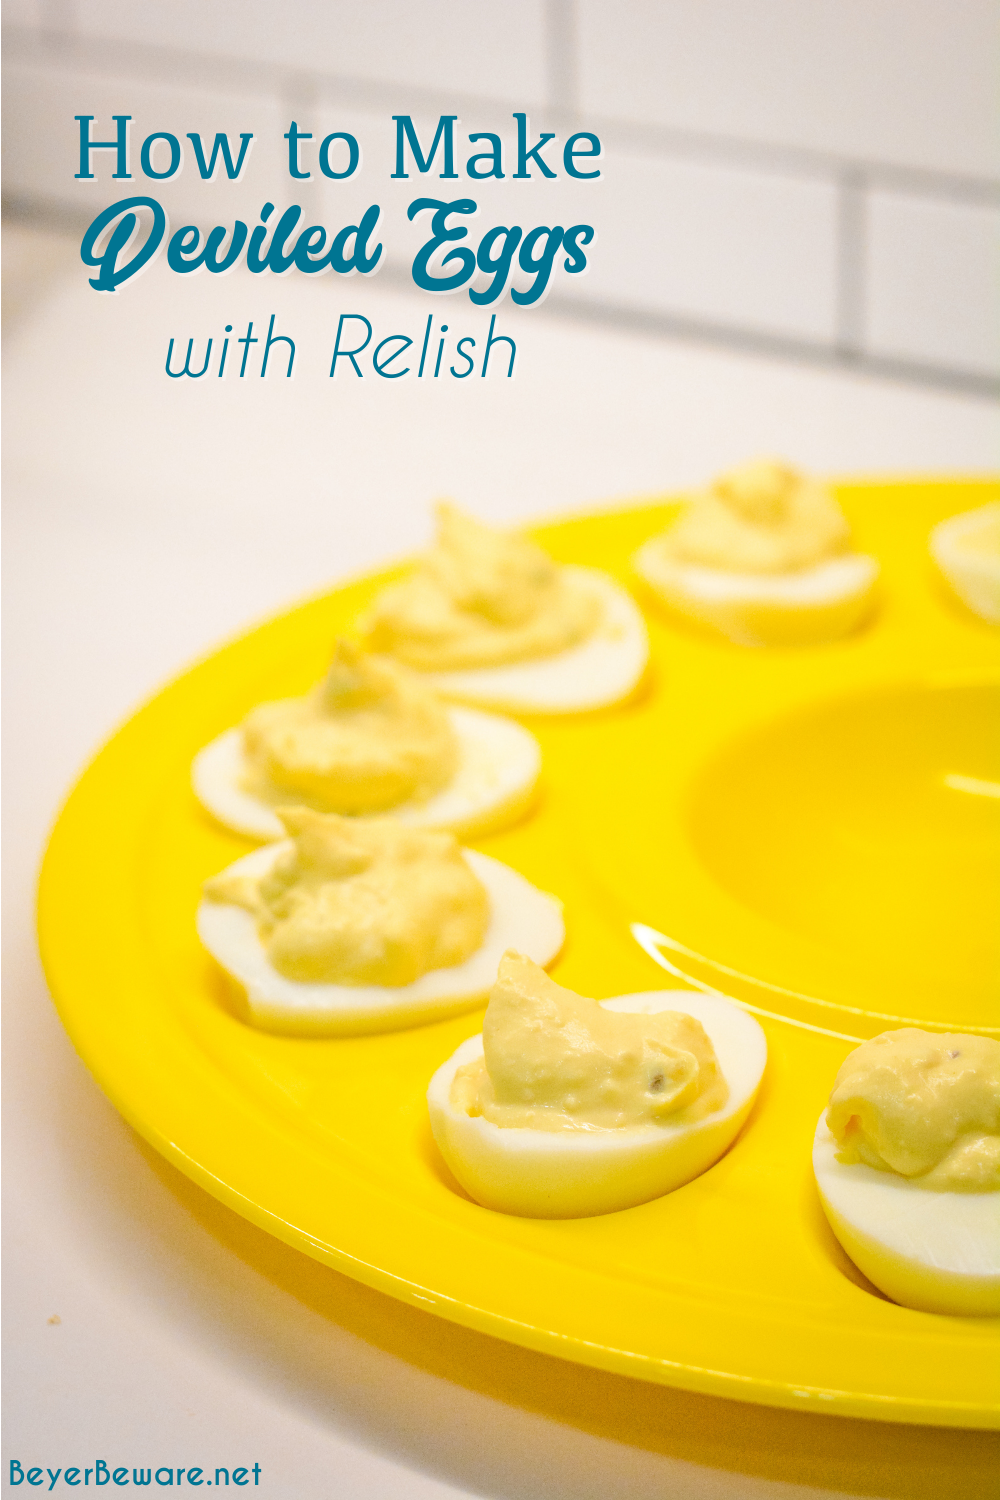 This is an easy deviled egg recipe made with relish, dijon mustard, and mayonnaise.